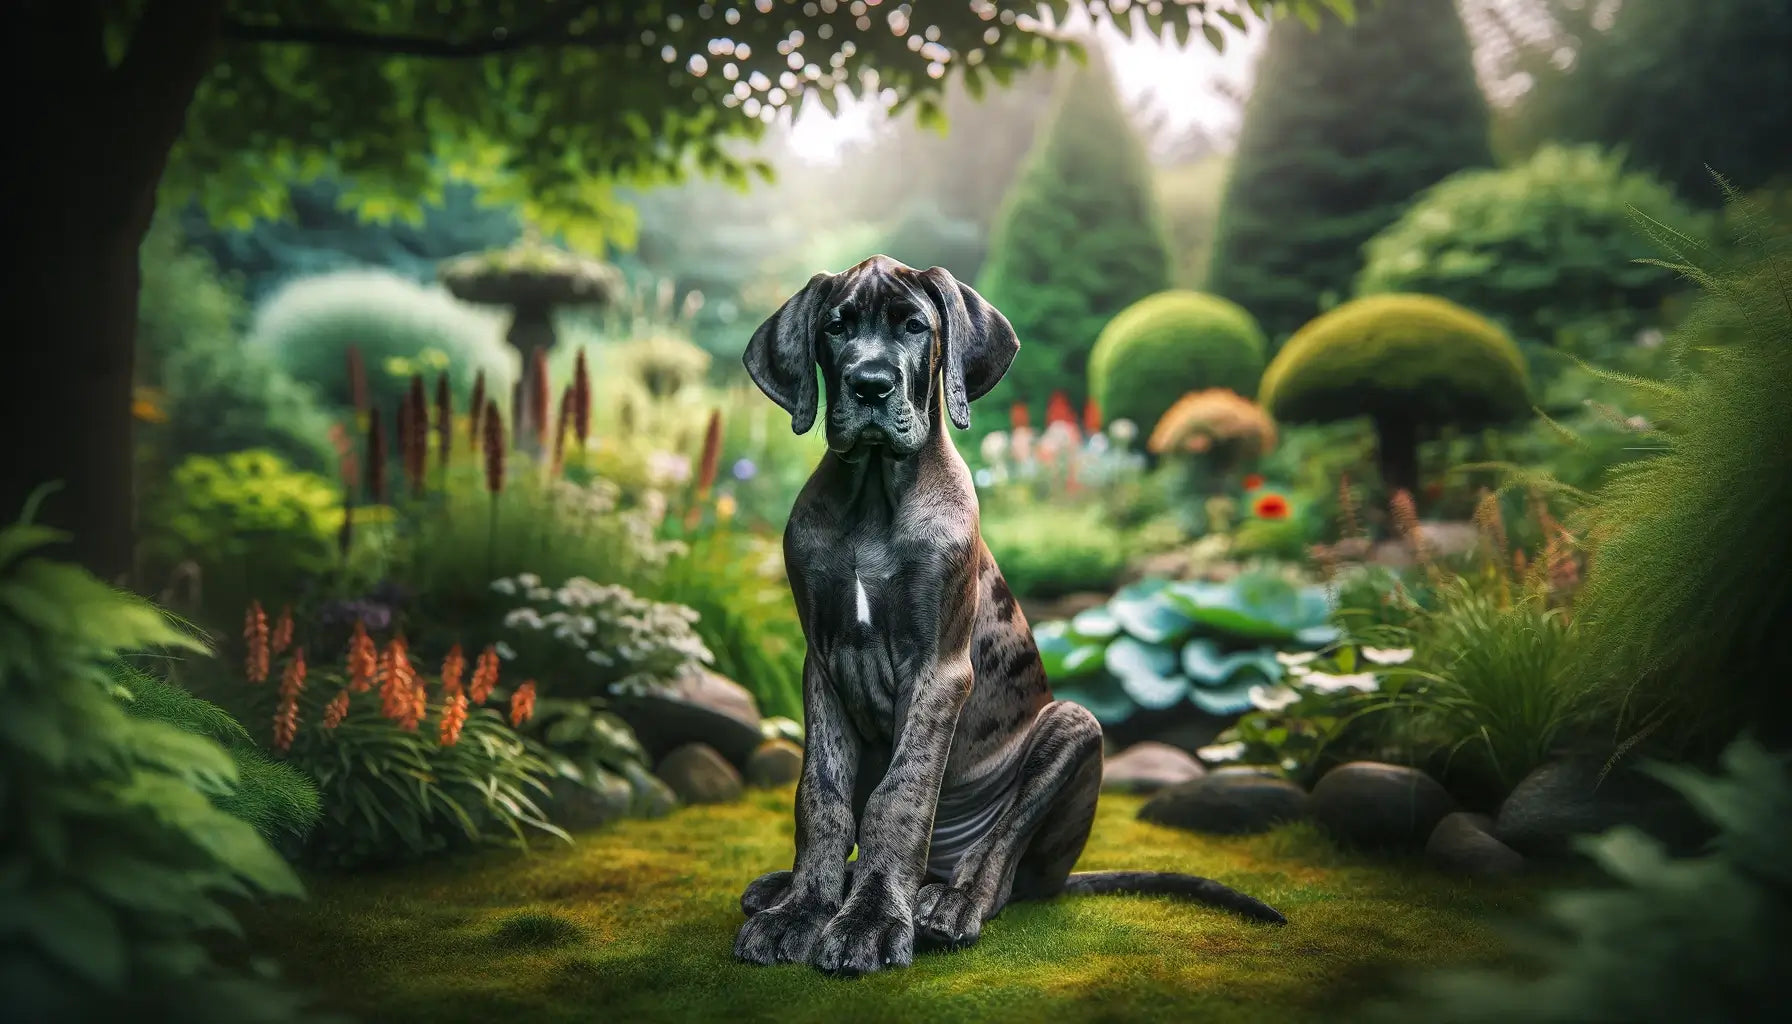 Brindle Great Dane puppy in a serene garden setting surrounded by nature, its well-groomed coat and calm expression.